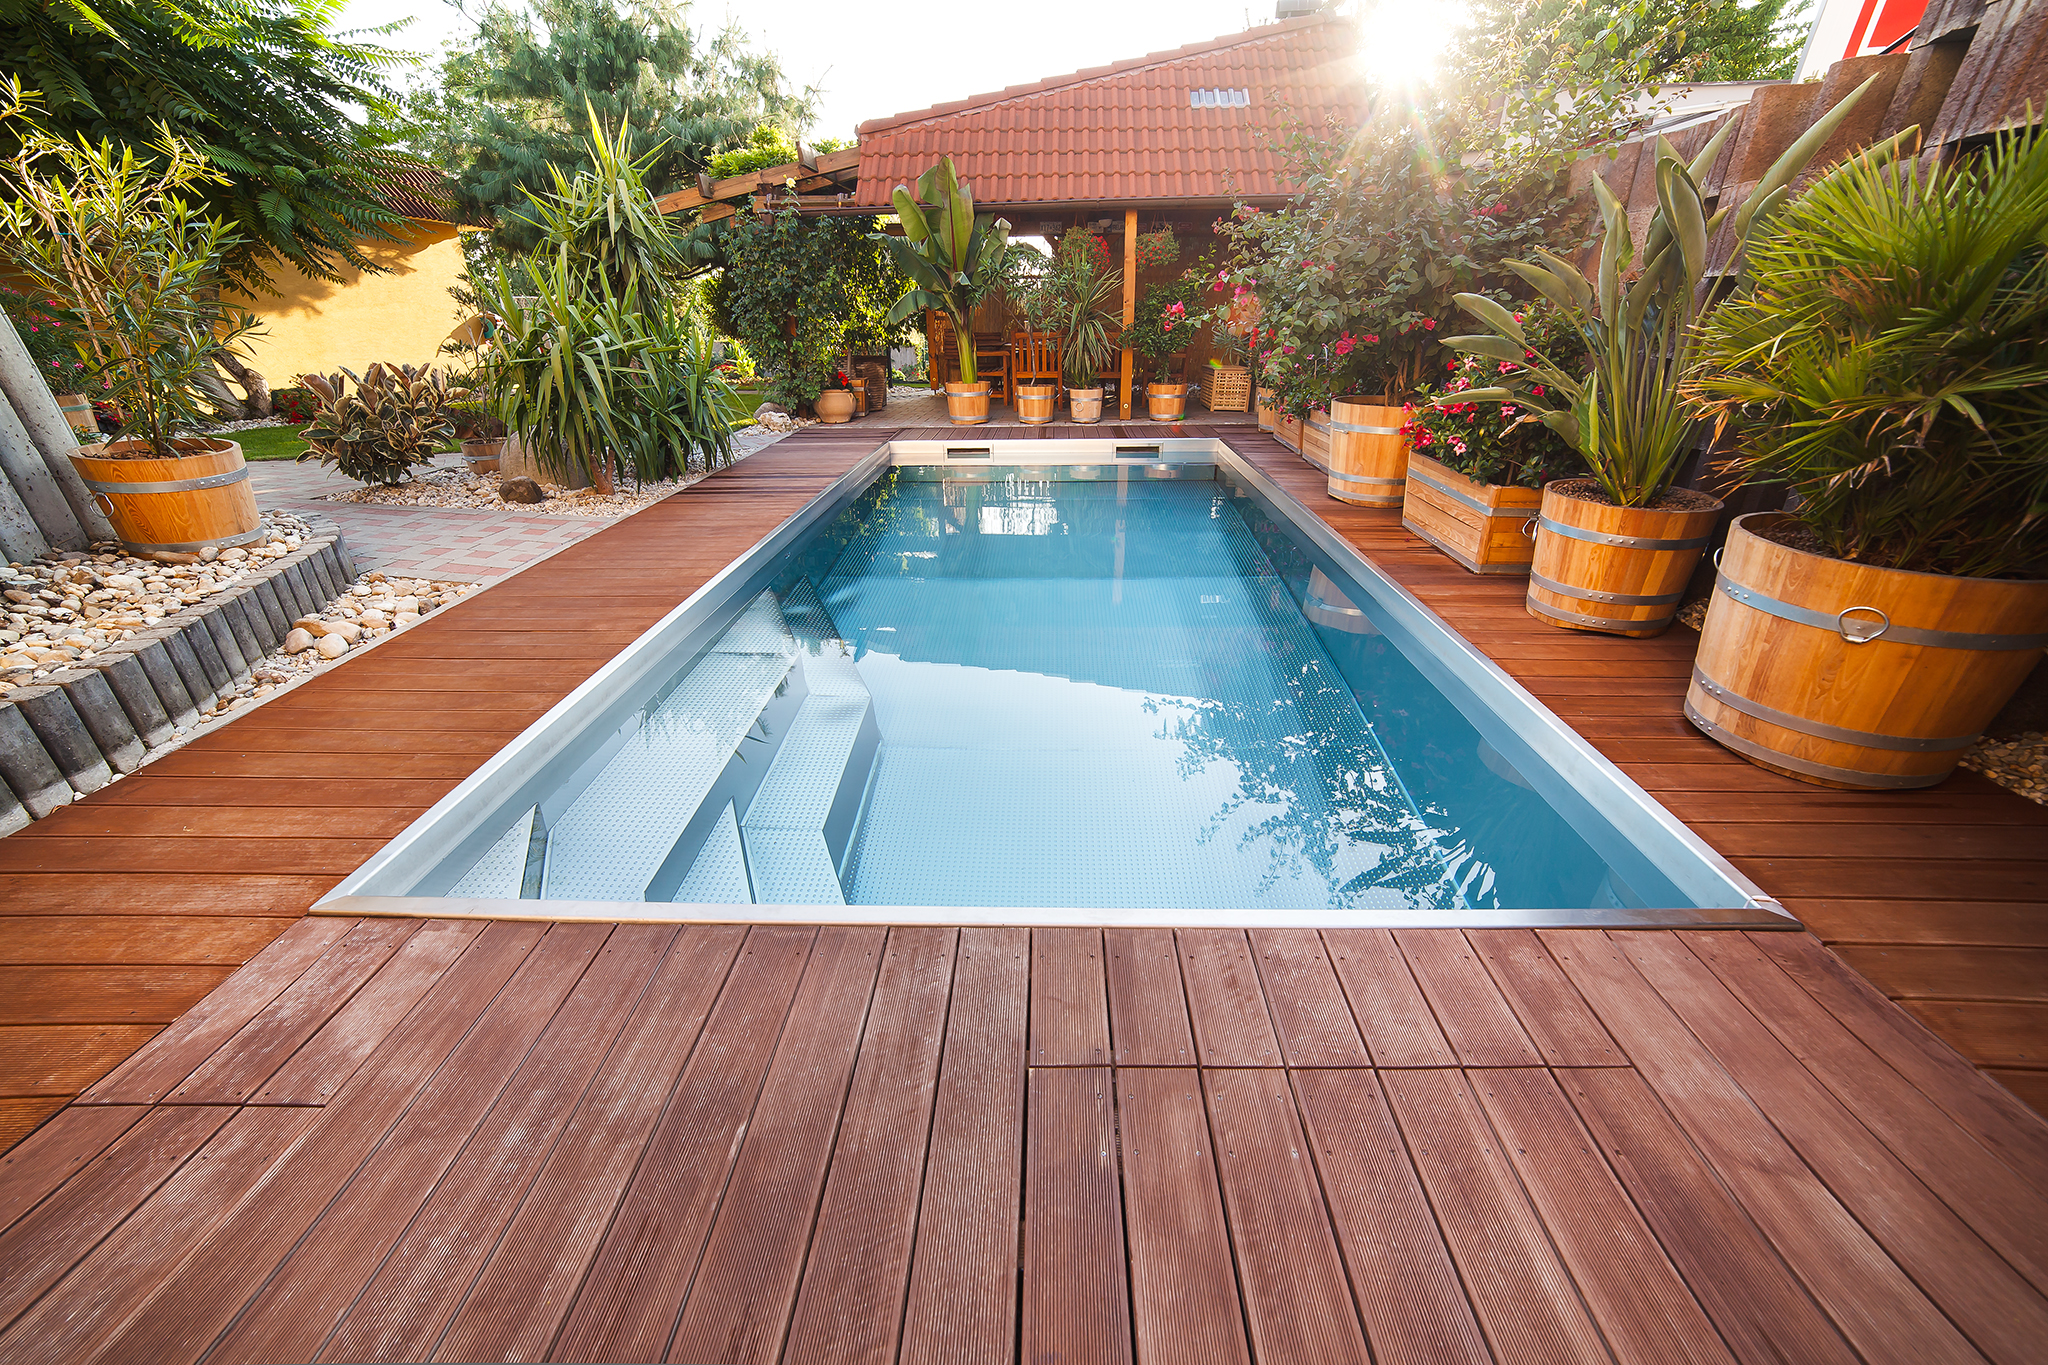 Renovation: Replacement of a Plastic Pool with a Stainless-Steel One | IMAGINOX GROUP